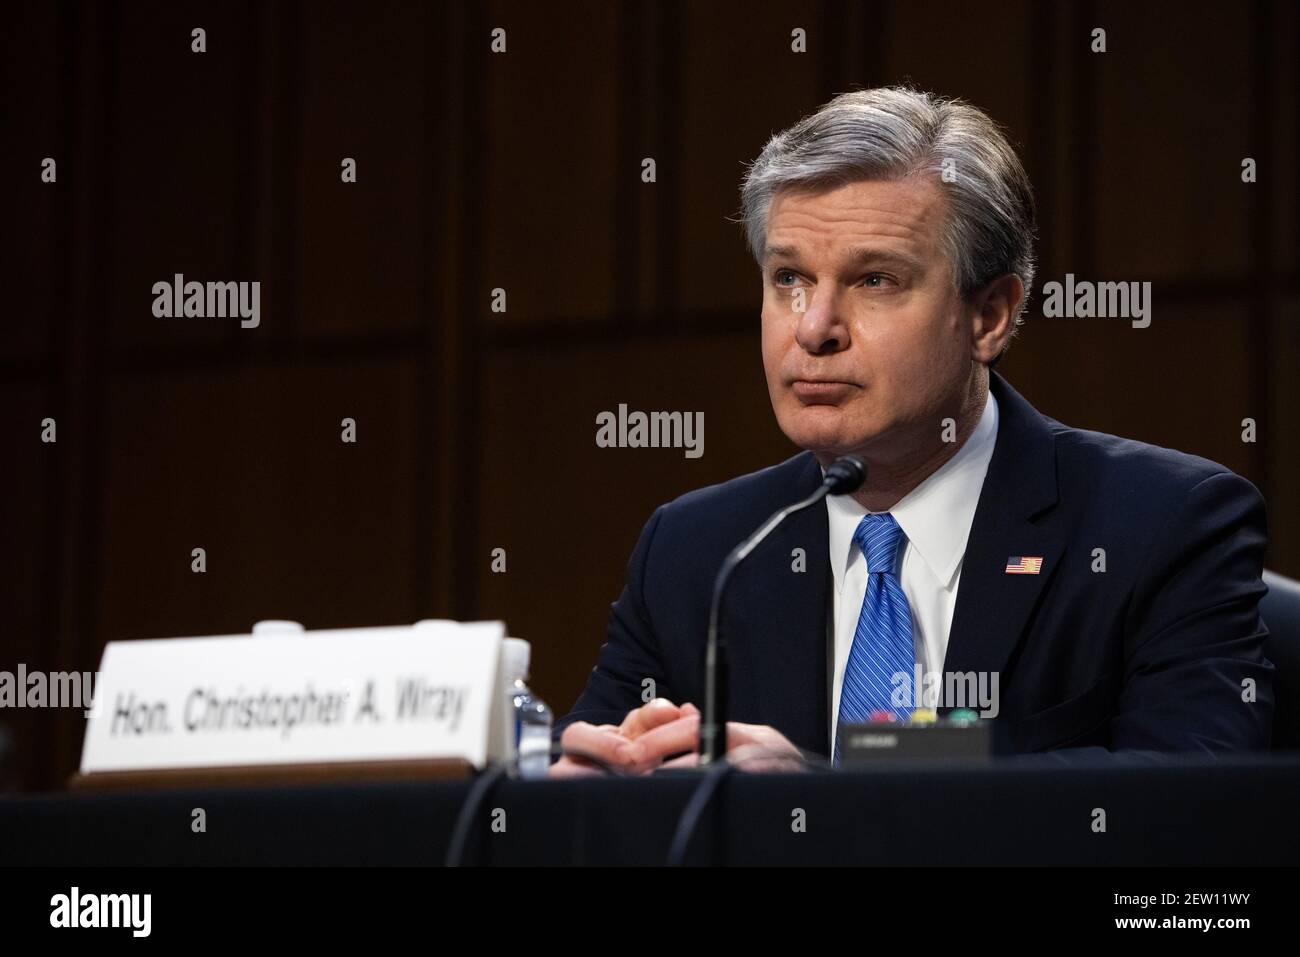 Federal Bureau of Investigation Director Christopher Wray arrives on Capitol Hill, in Washington, before a Senate Judiciary Committee on the the January 6th Insurrection, domestic terrorism and other threats, Tuesday, March 2, 2021.Credit: Graeme Jennings/Pool via CNP /MediaPunch Stock Photo